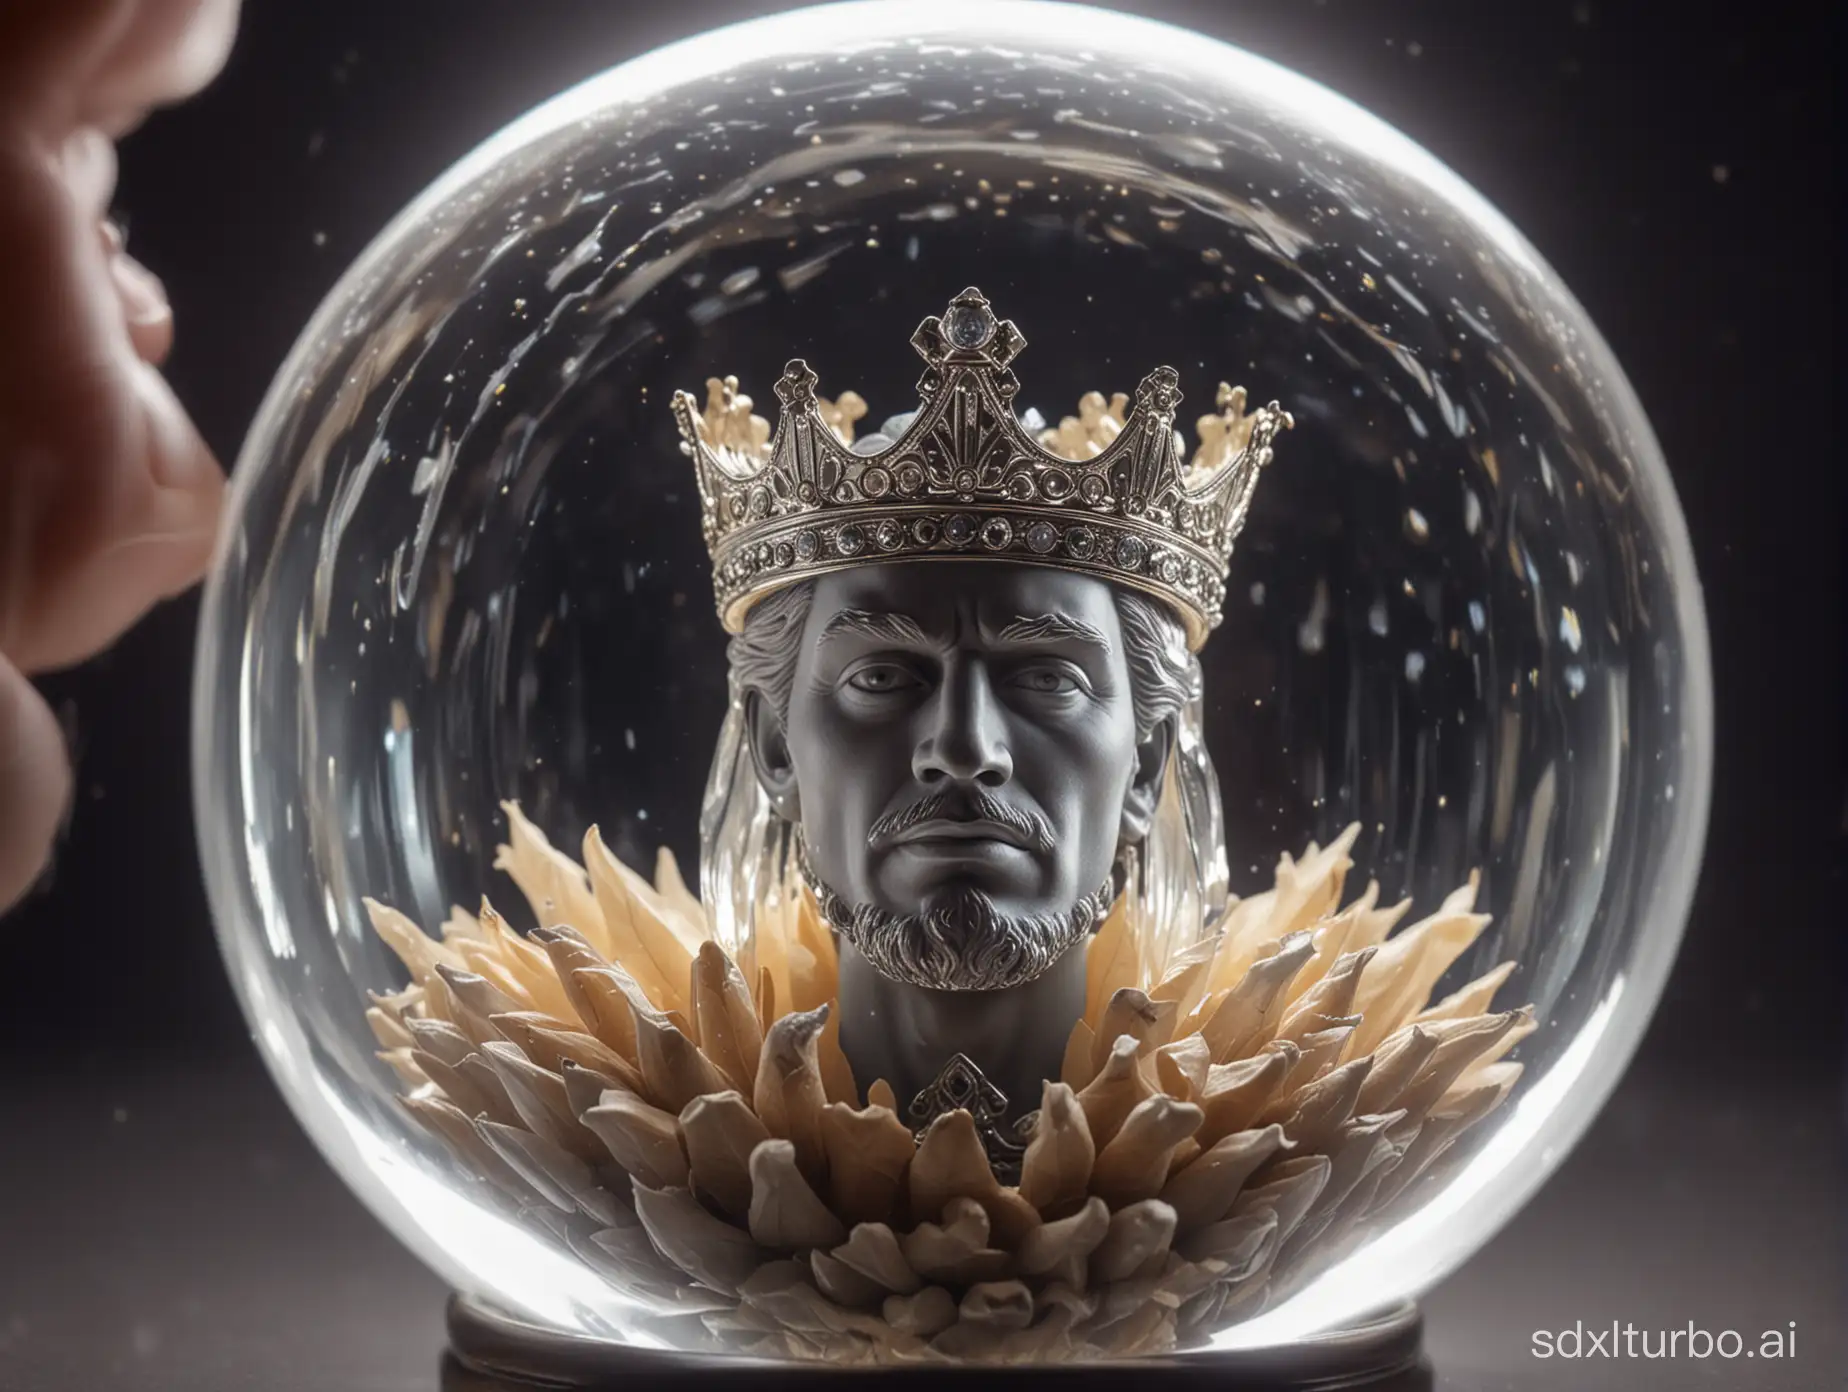 from a first person perspective looking into a chrystal ball showing the whishes of a customer depicted as a king